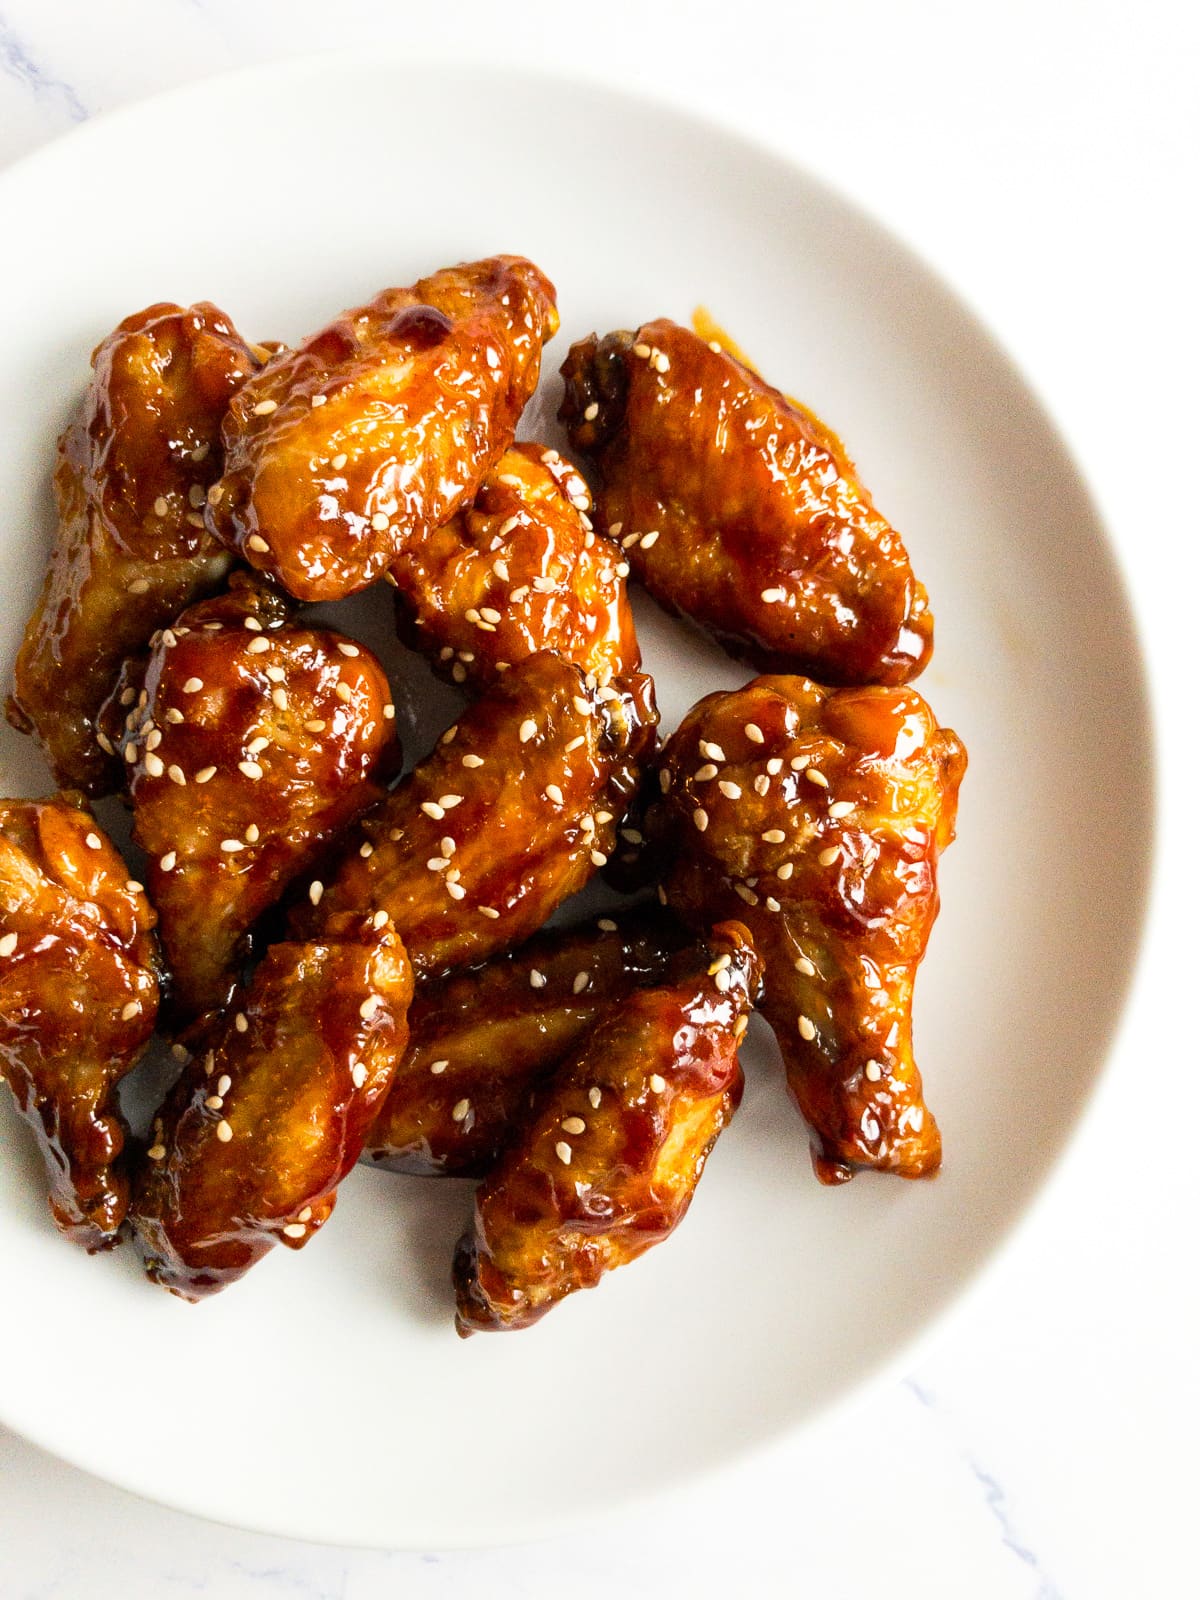 teriyaki chicken wings garnished with sesame seeds on a white plate